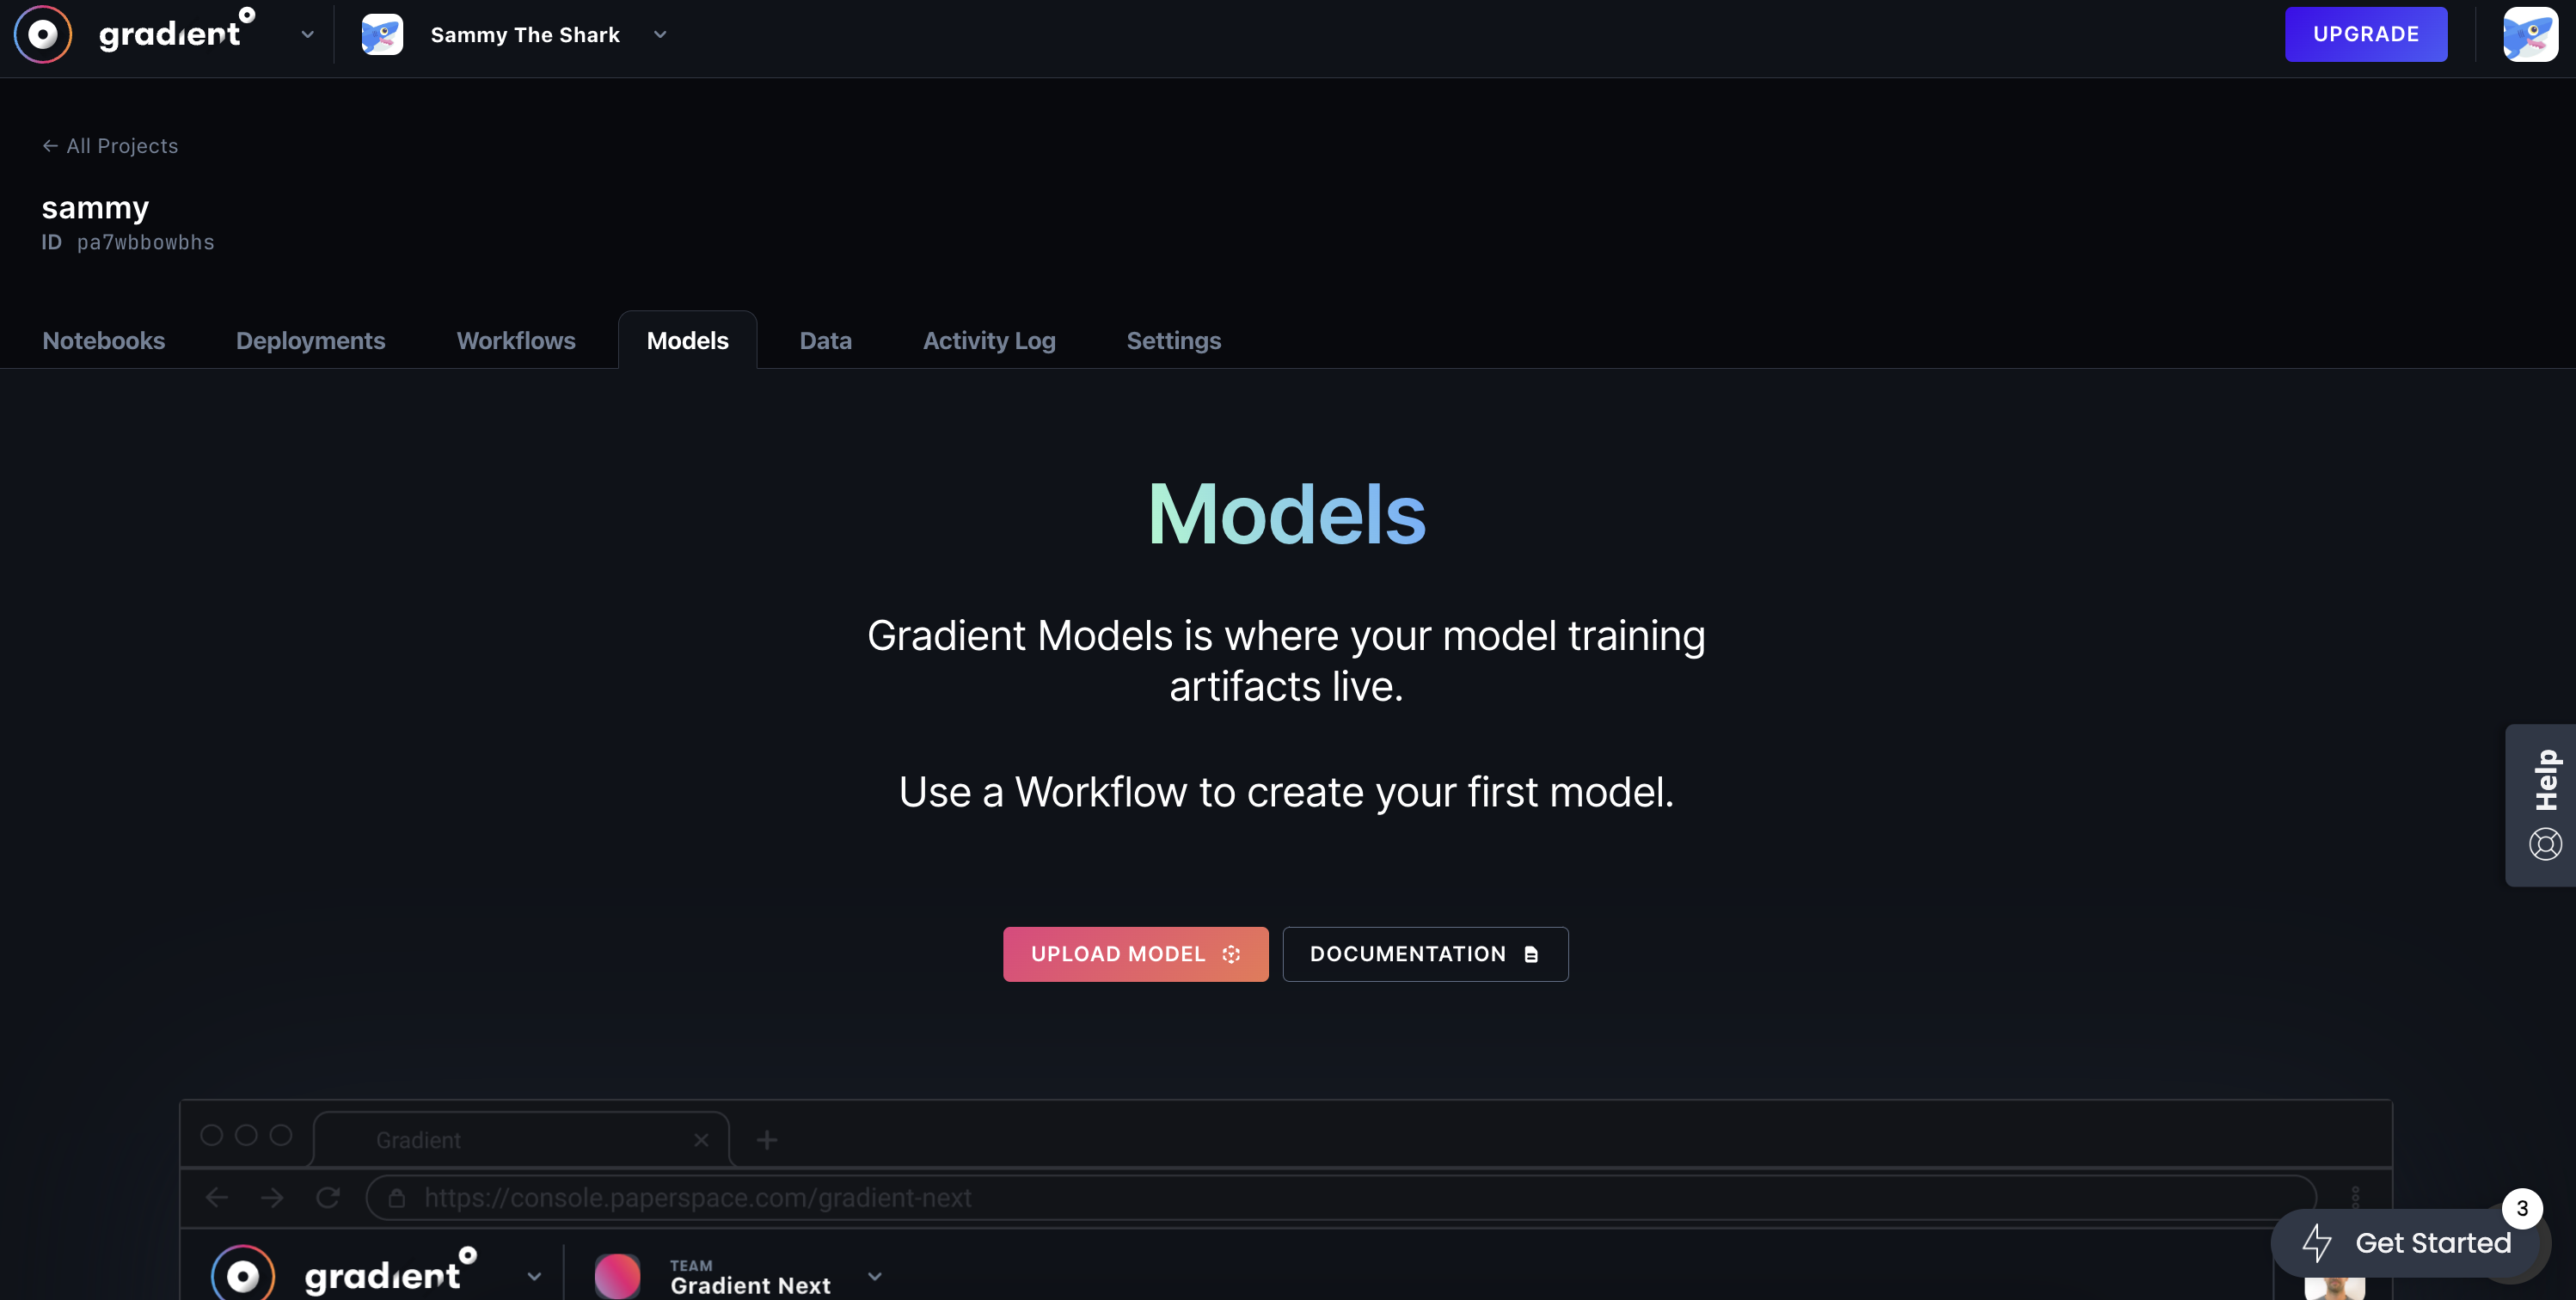 No models are created yet within projects